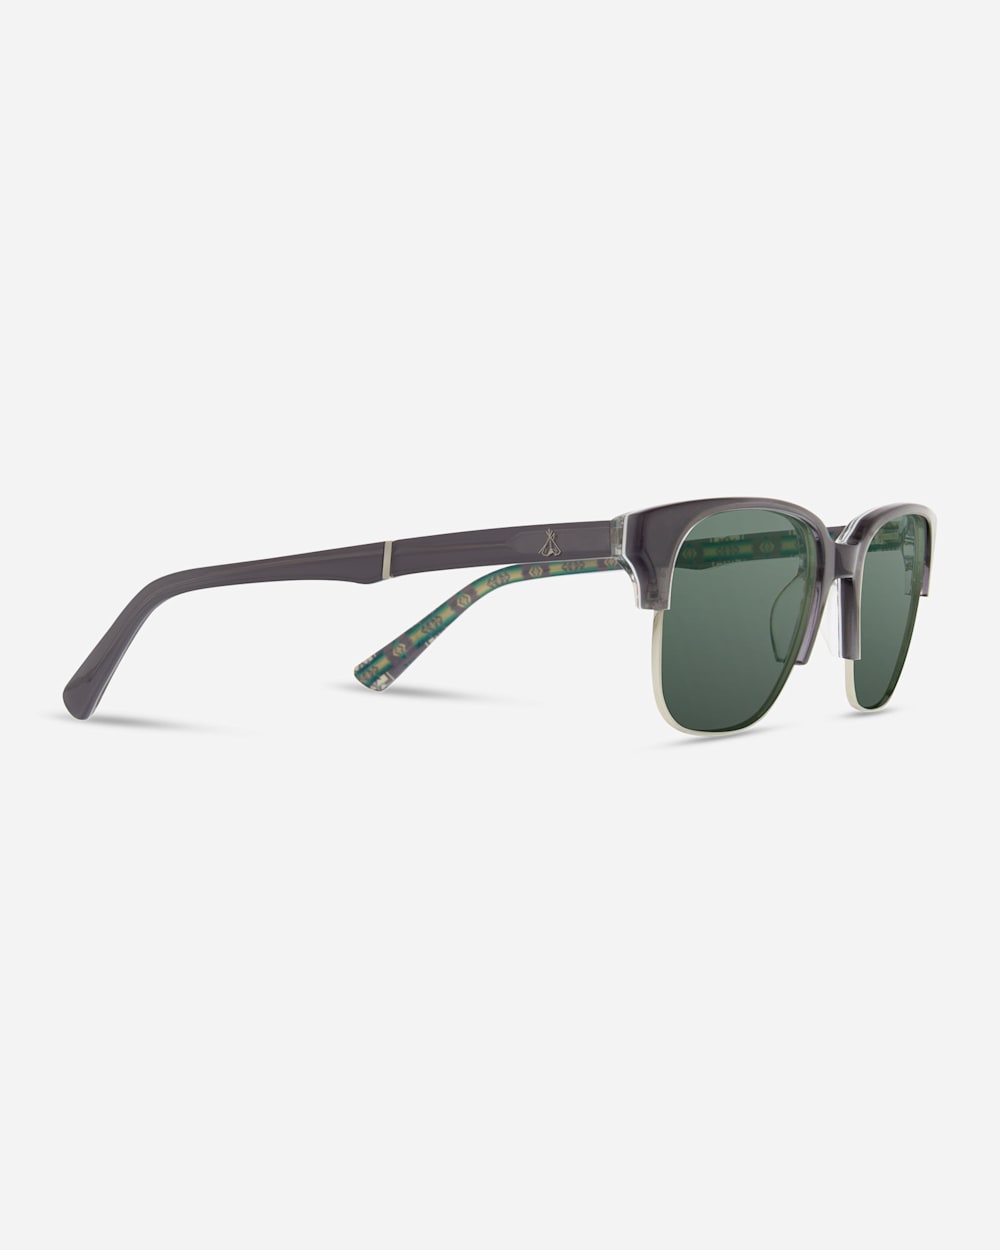 ADDITIONAL VIEW OF SHWOOD X PENDLETON NEWPORT SUNGLASSES IN CHIEF JOSEPH GREY image number 2